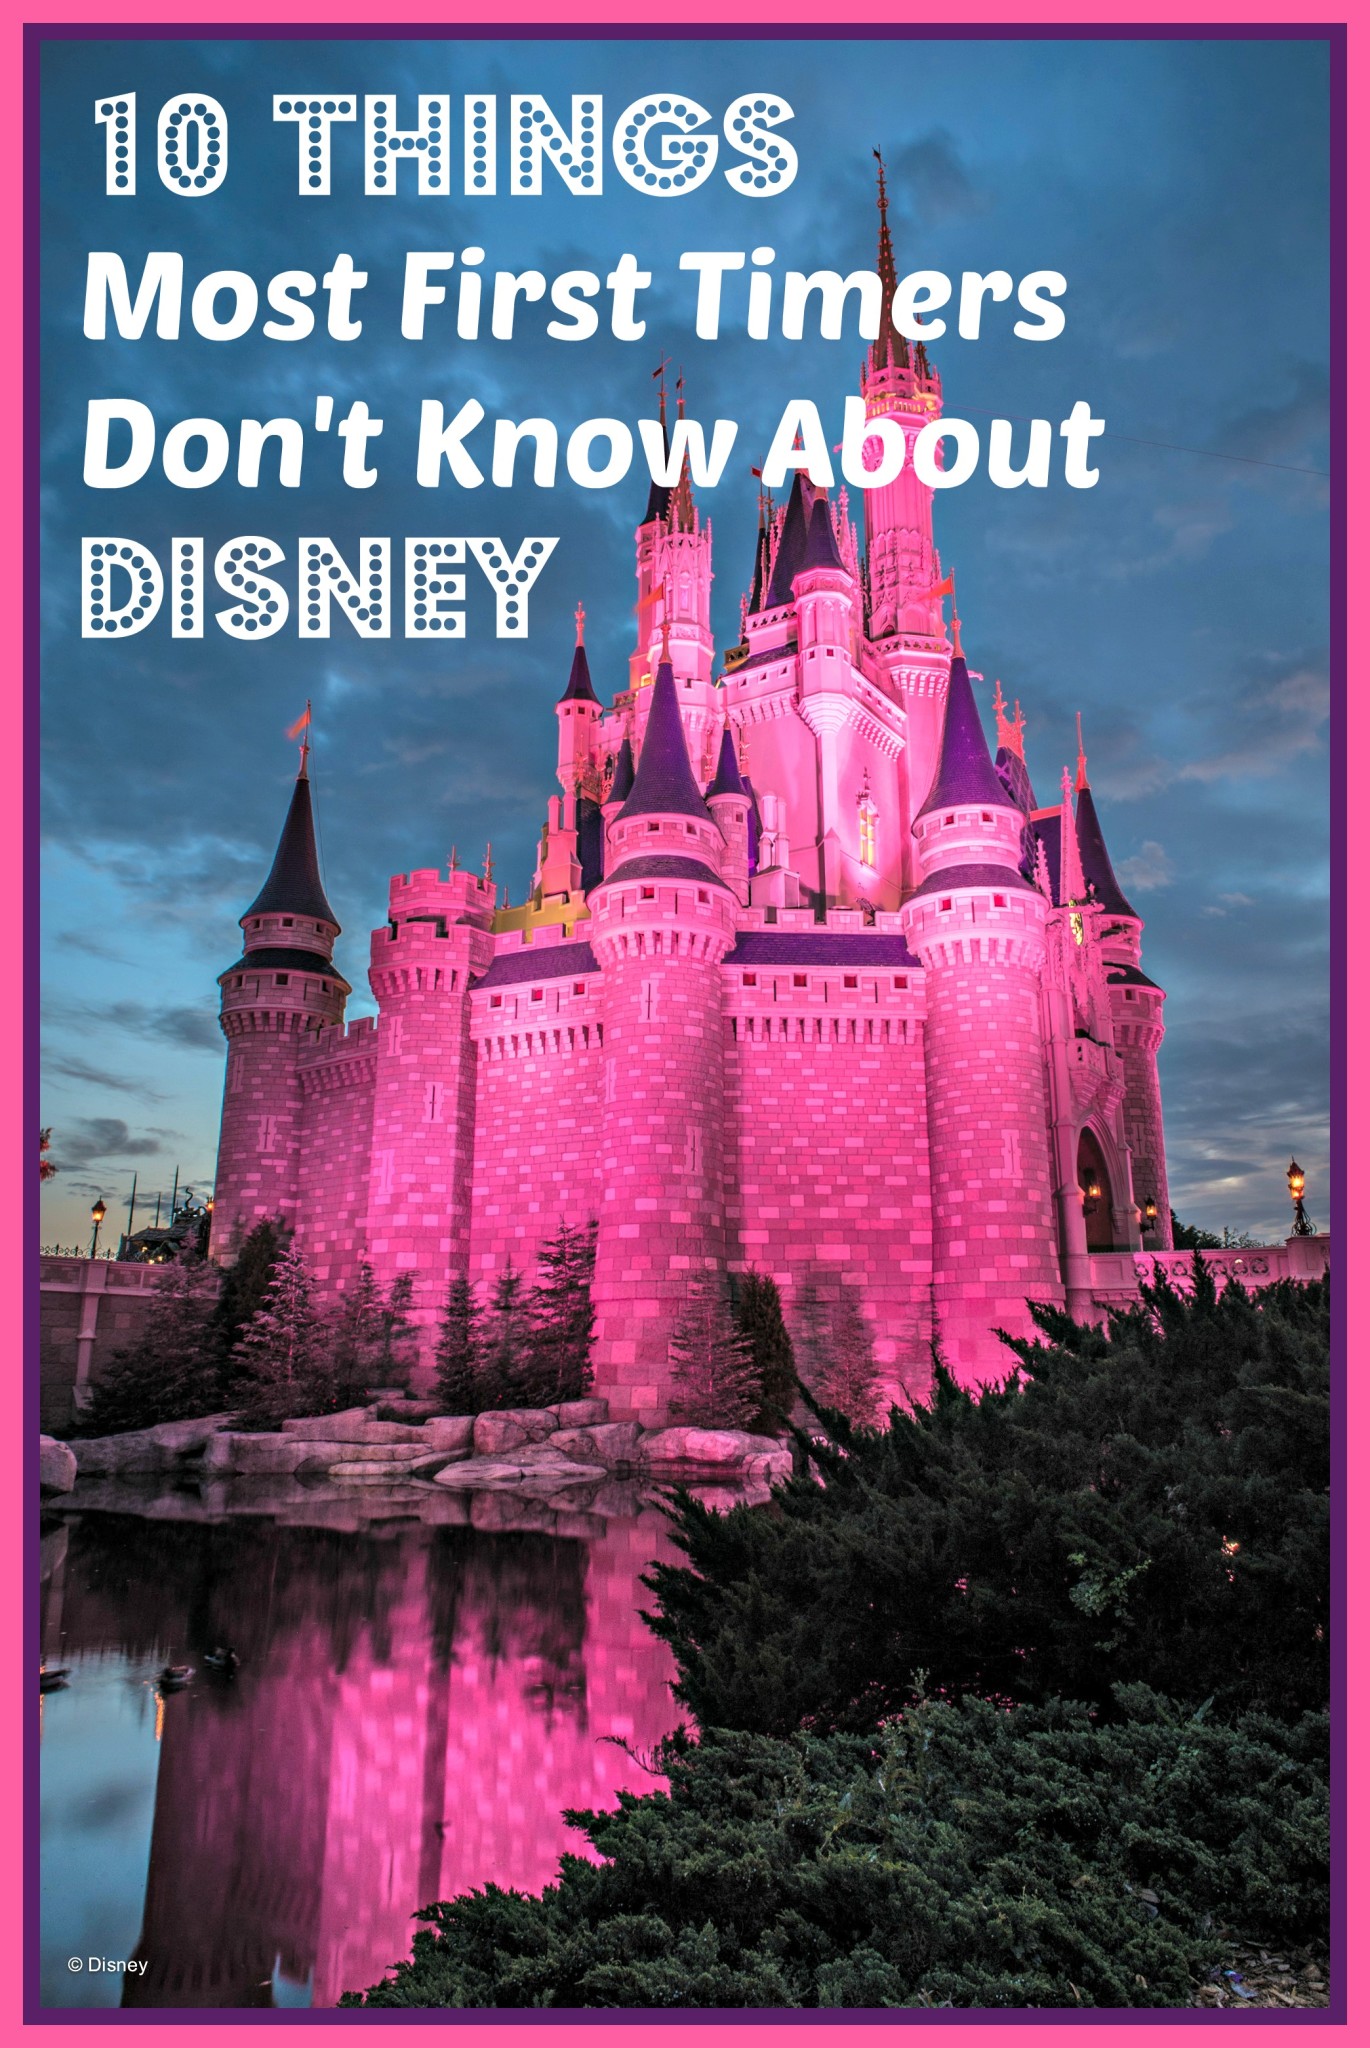 10 Things Most First Timers Don’t Know About Disney World